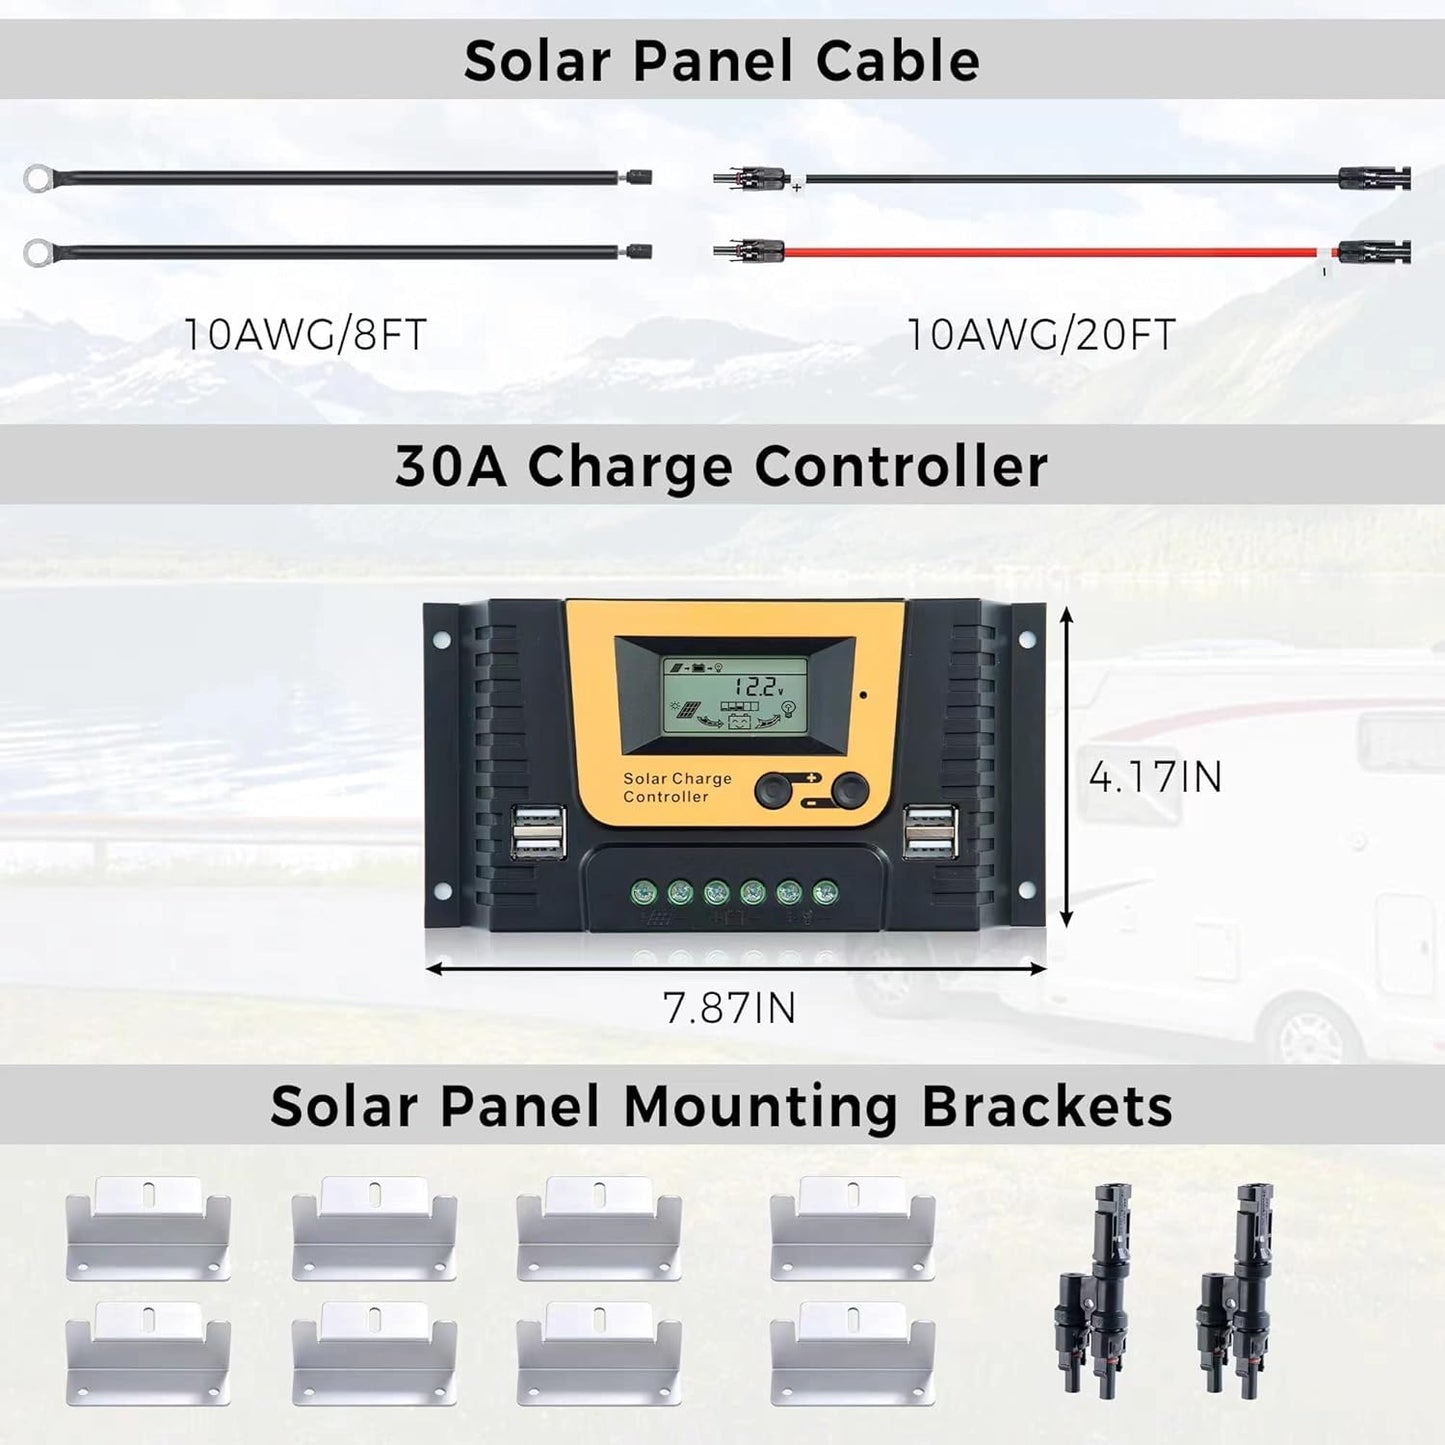 200W 12V Solar Panel Kit for RV, Trailer, Camper, Marine, Off Grid| 2pcs 100W Solar Panel, 30A PWM Solar Charge Controller,100Ah Lithium Battery,1100W Power Inverter